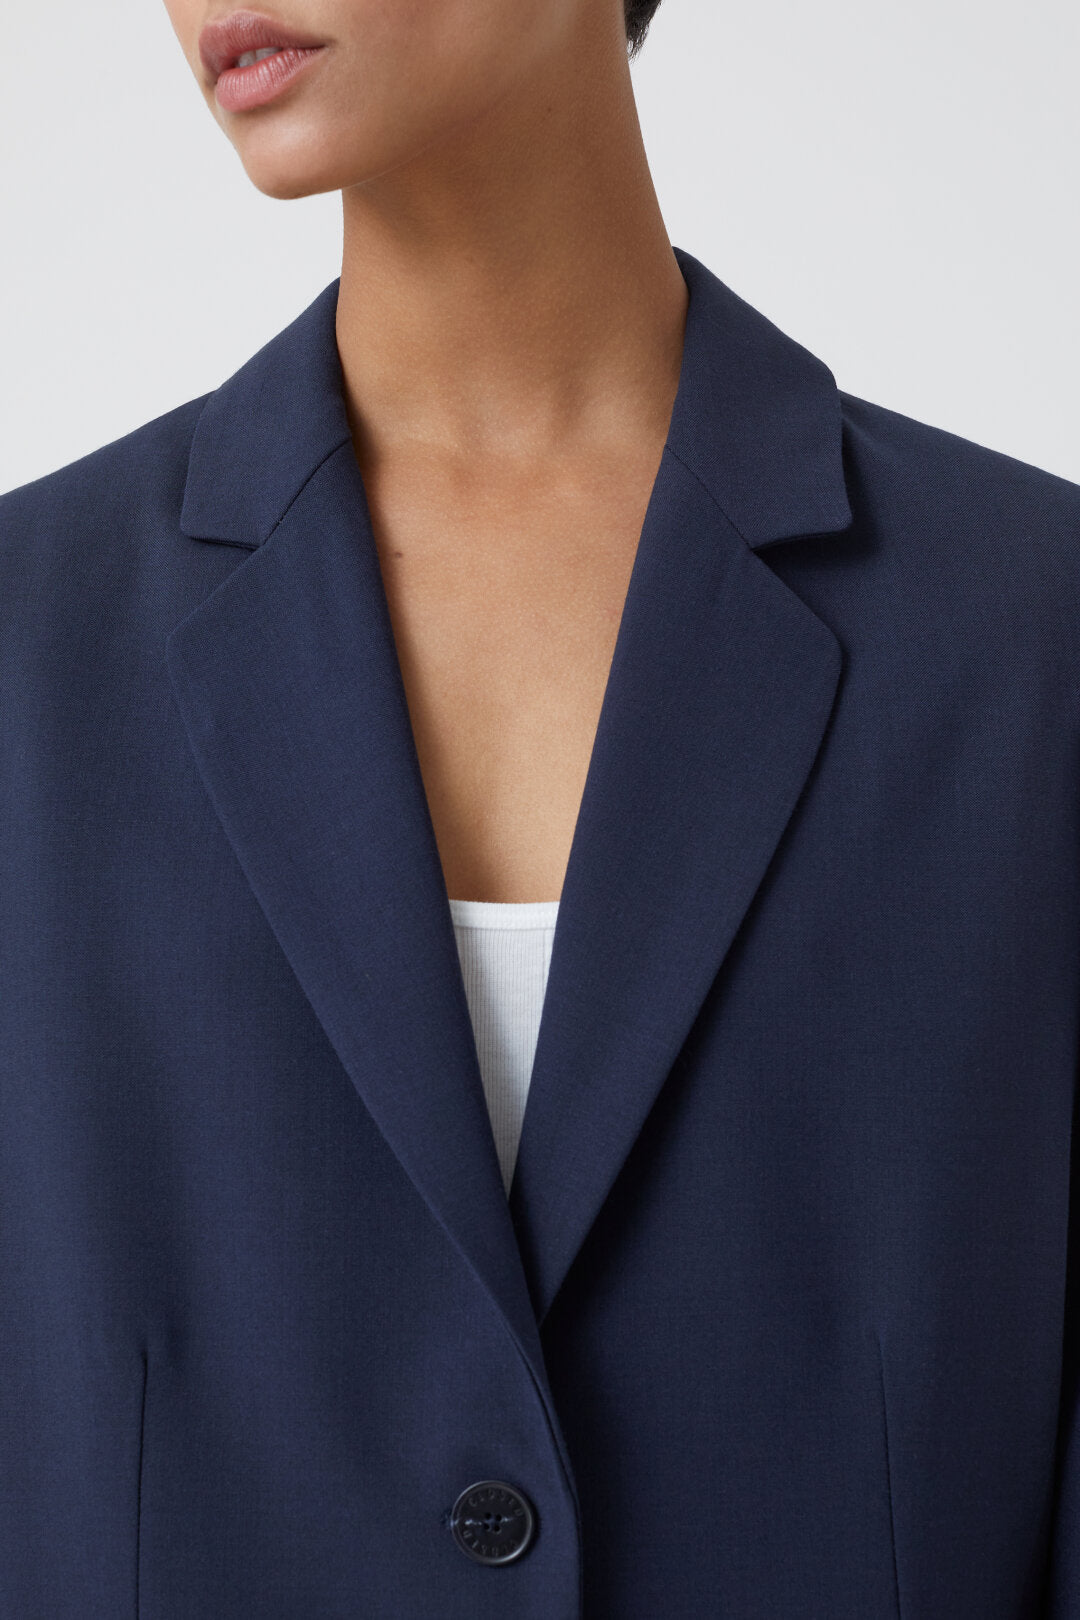 CLOSED LOLA RELAXED BLAZER - S. LABELS